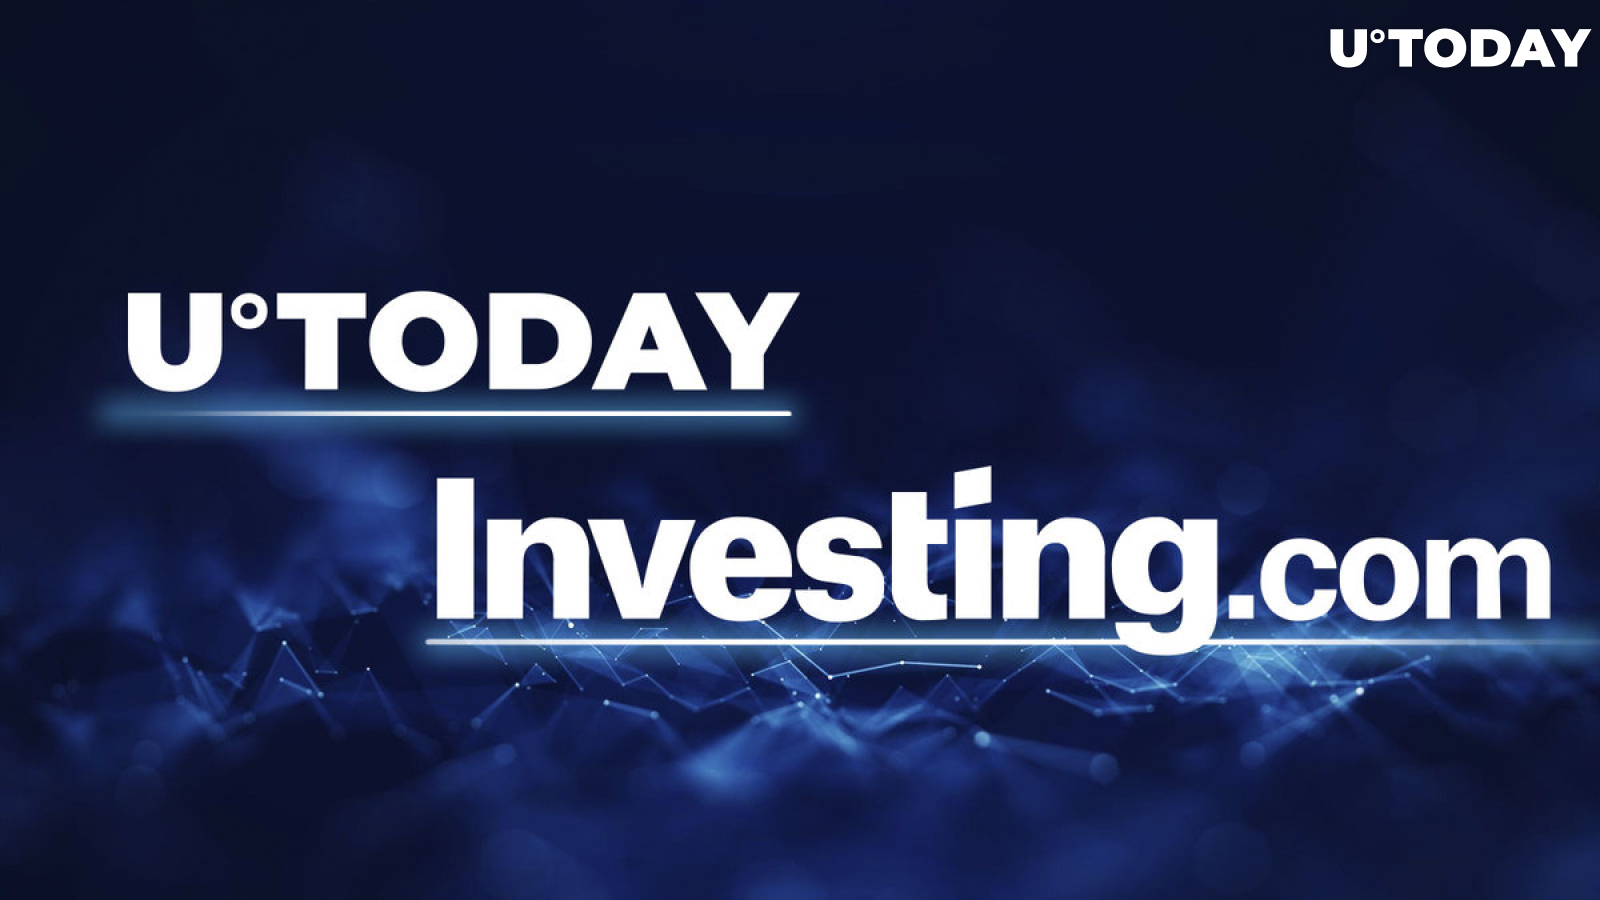 AI, Crypto, Blockchain Content by U.Today Indexed on Investing.com